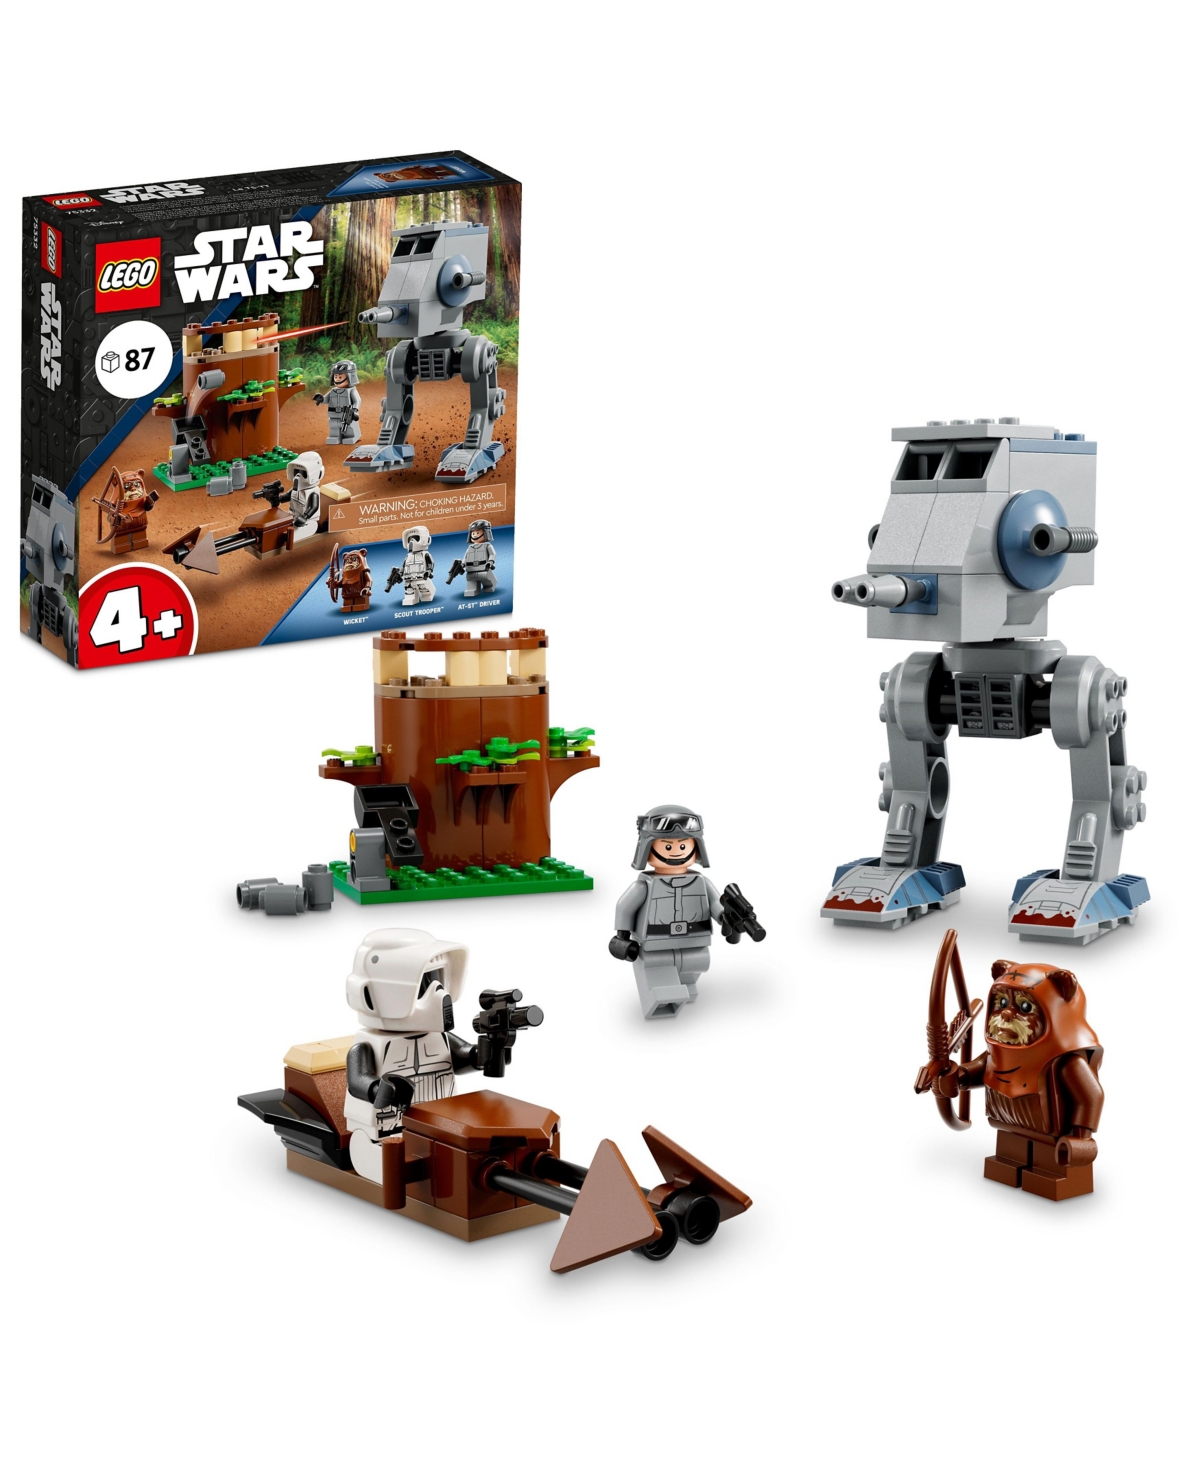 Lego Star Wars At-st 75332 Building Set, 87 Pieces In Multicolor